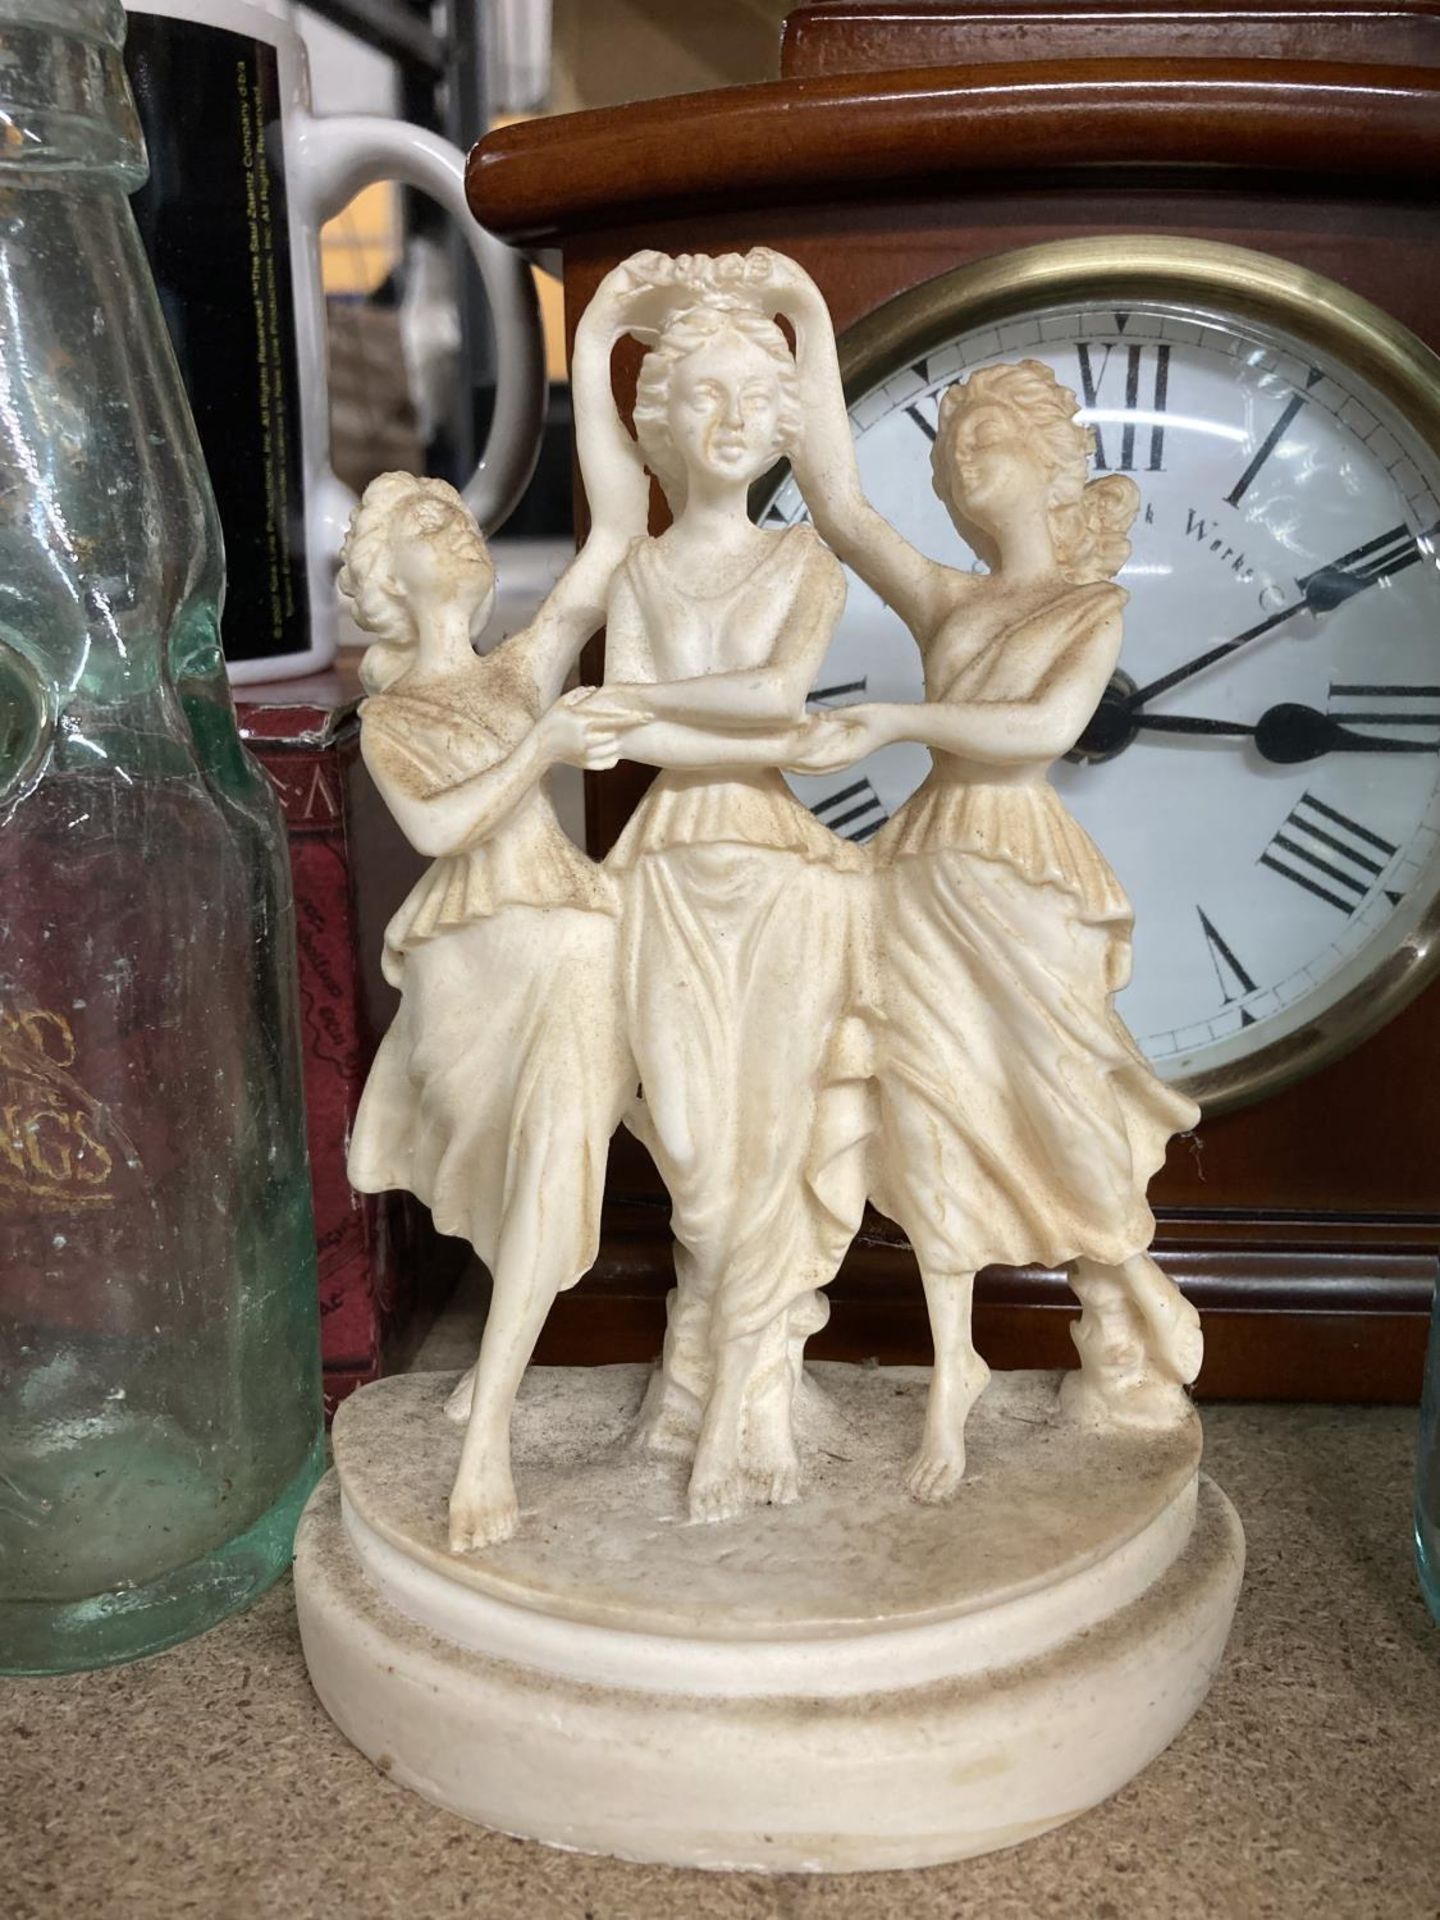 VARIOUS COLLECTABLE ITEMS TO INCLUDE CLOCKS, BREWIANIA, STATUES ETC - Image 4 of 6